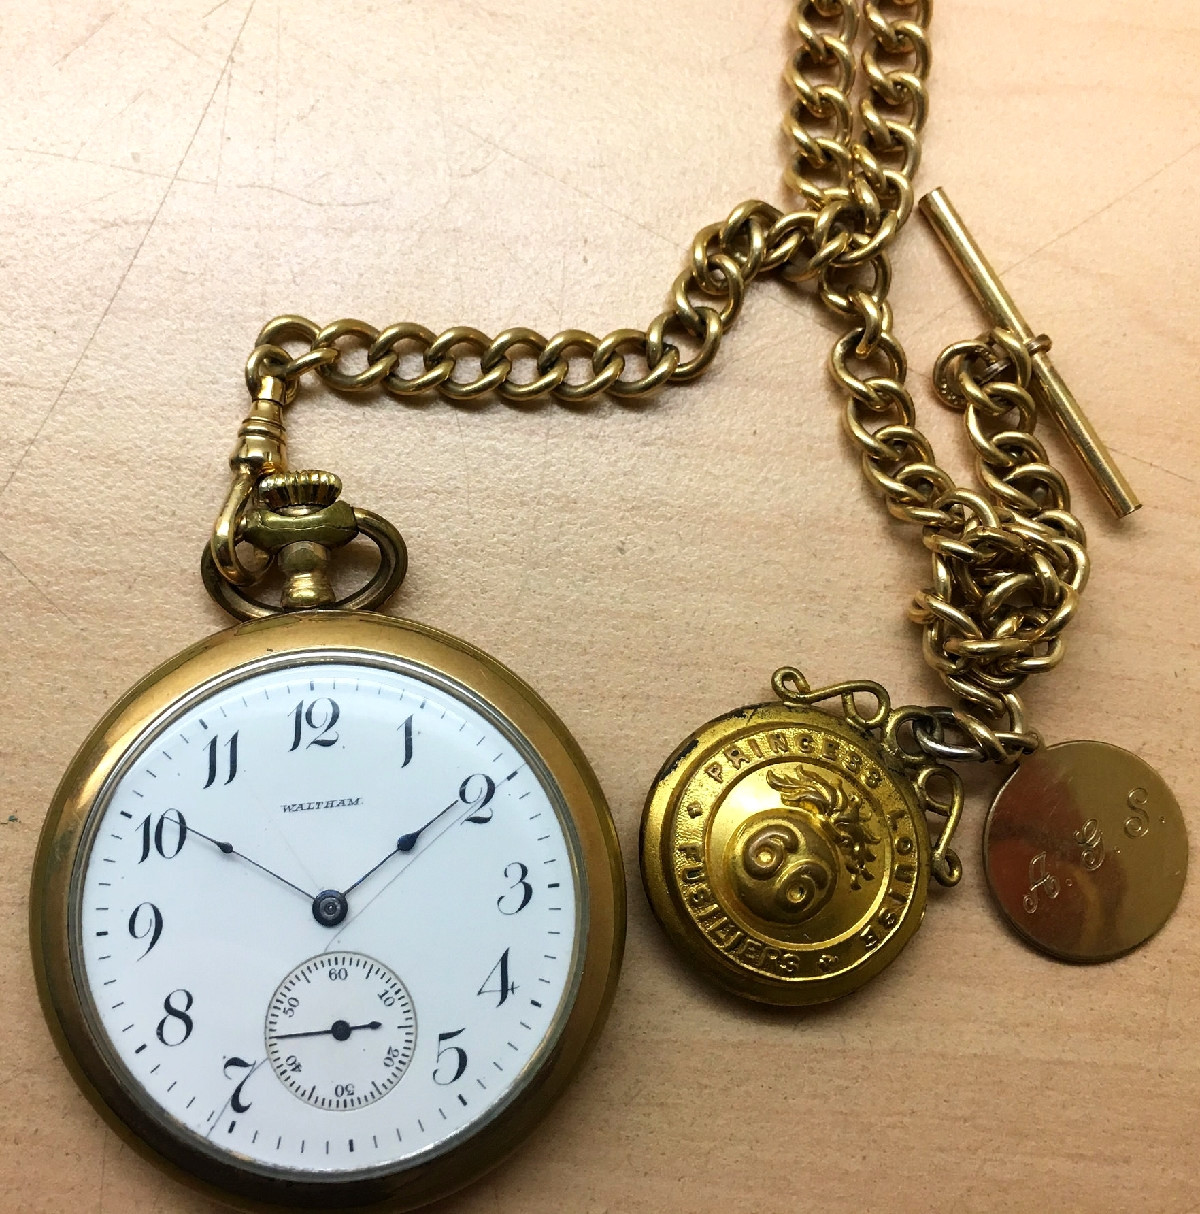 Waltham pocket watch once owned by a World War I veteran.. Credit Ross Dunn